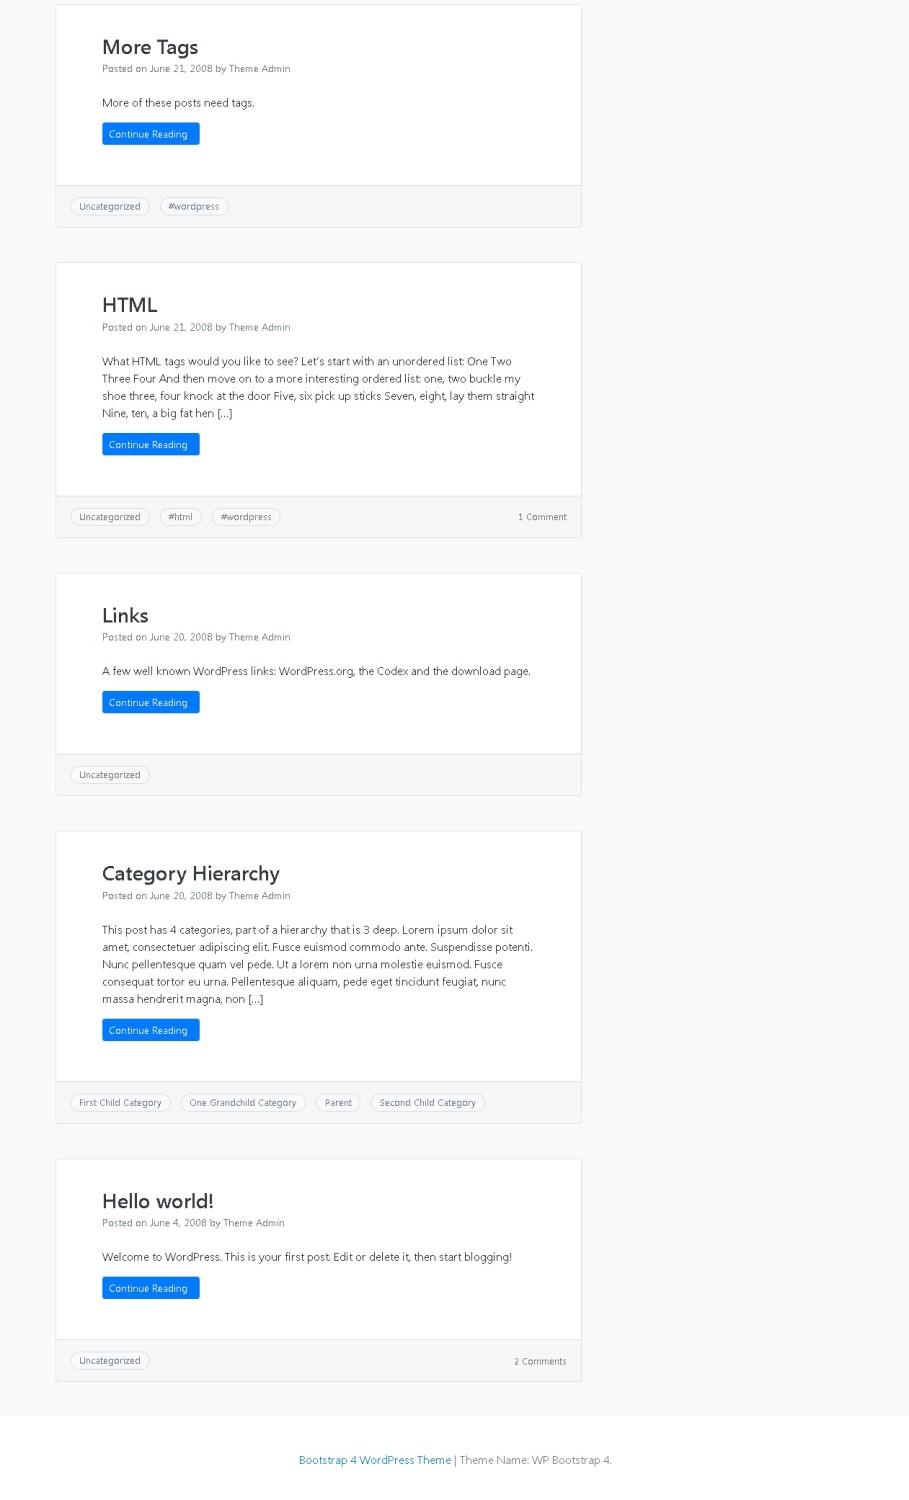 WP Bootstrap 4